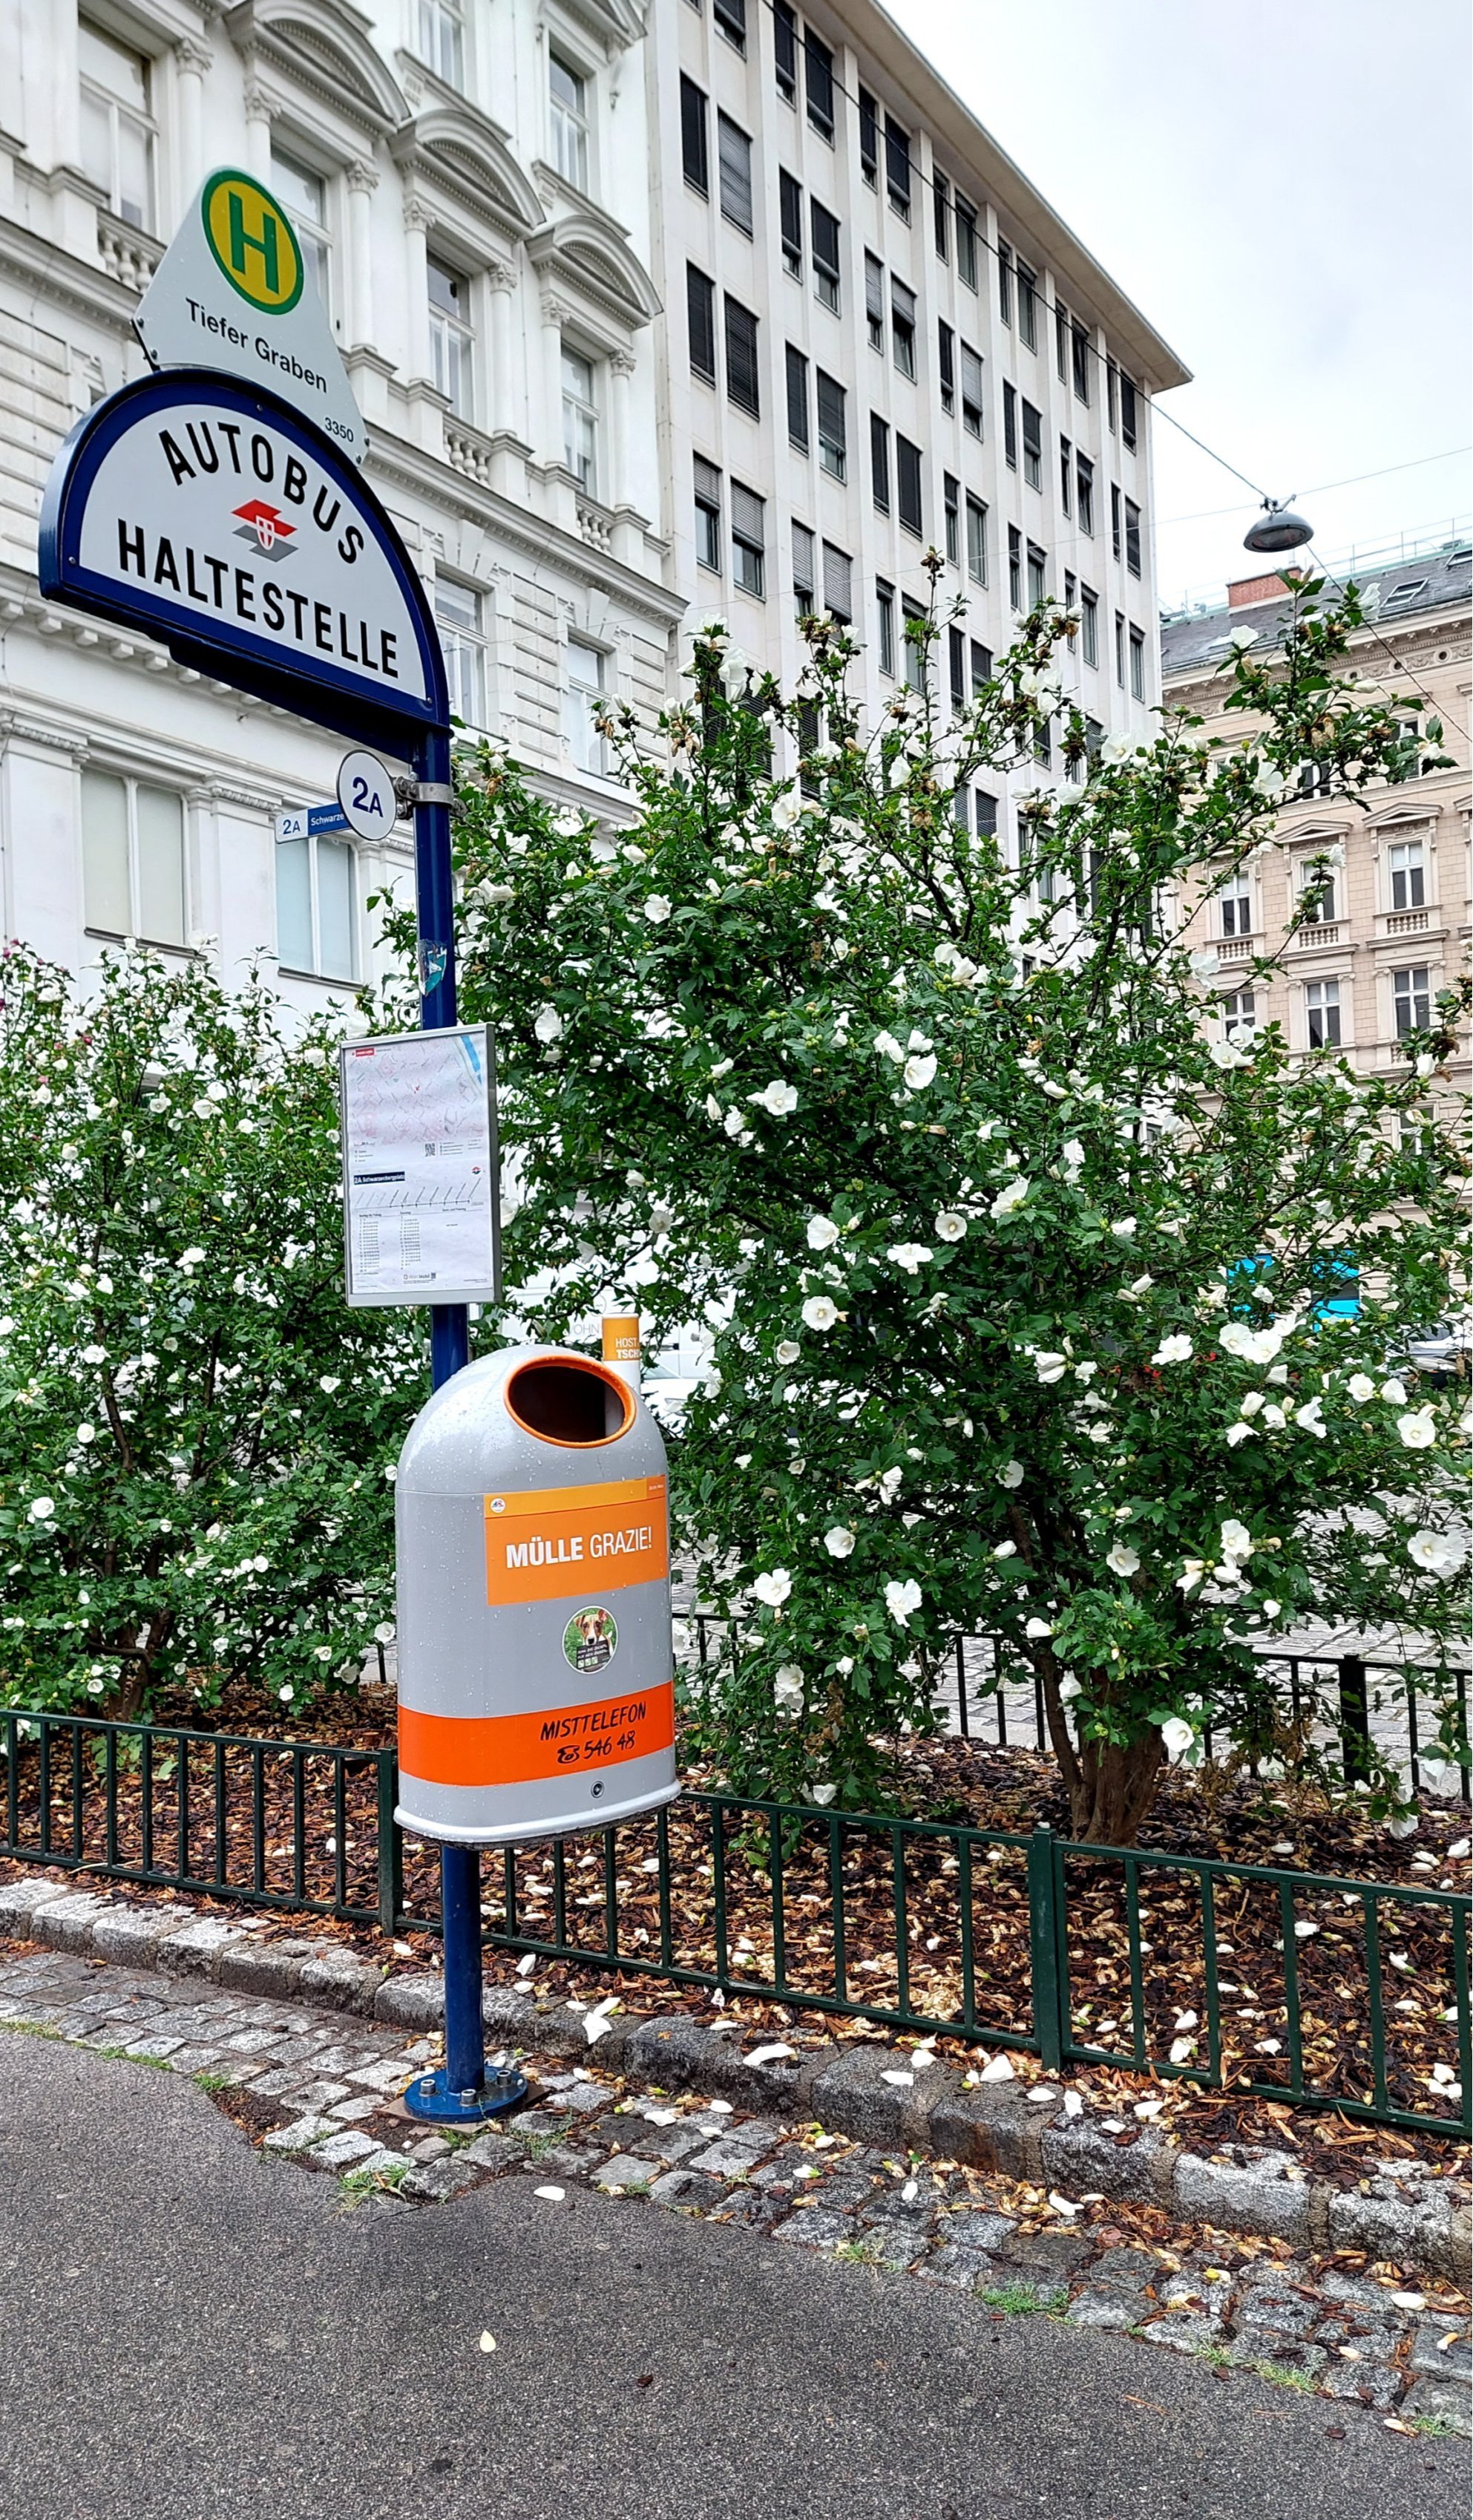 A grey and orange trash bin mounted on a blue bus stop sign in Vienna. In the background, white hibiscus flowers are blooming in front of one of the historical facades in Vienna’s first district.